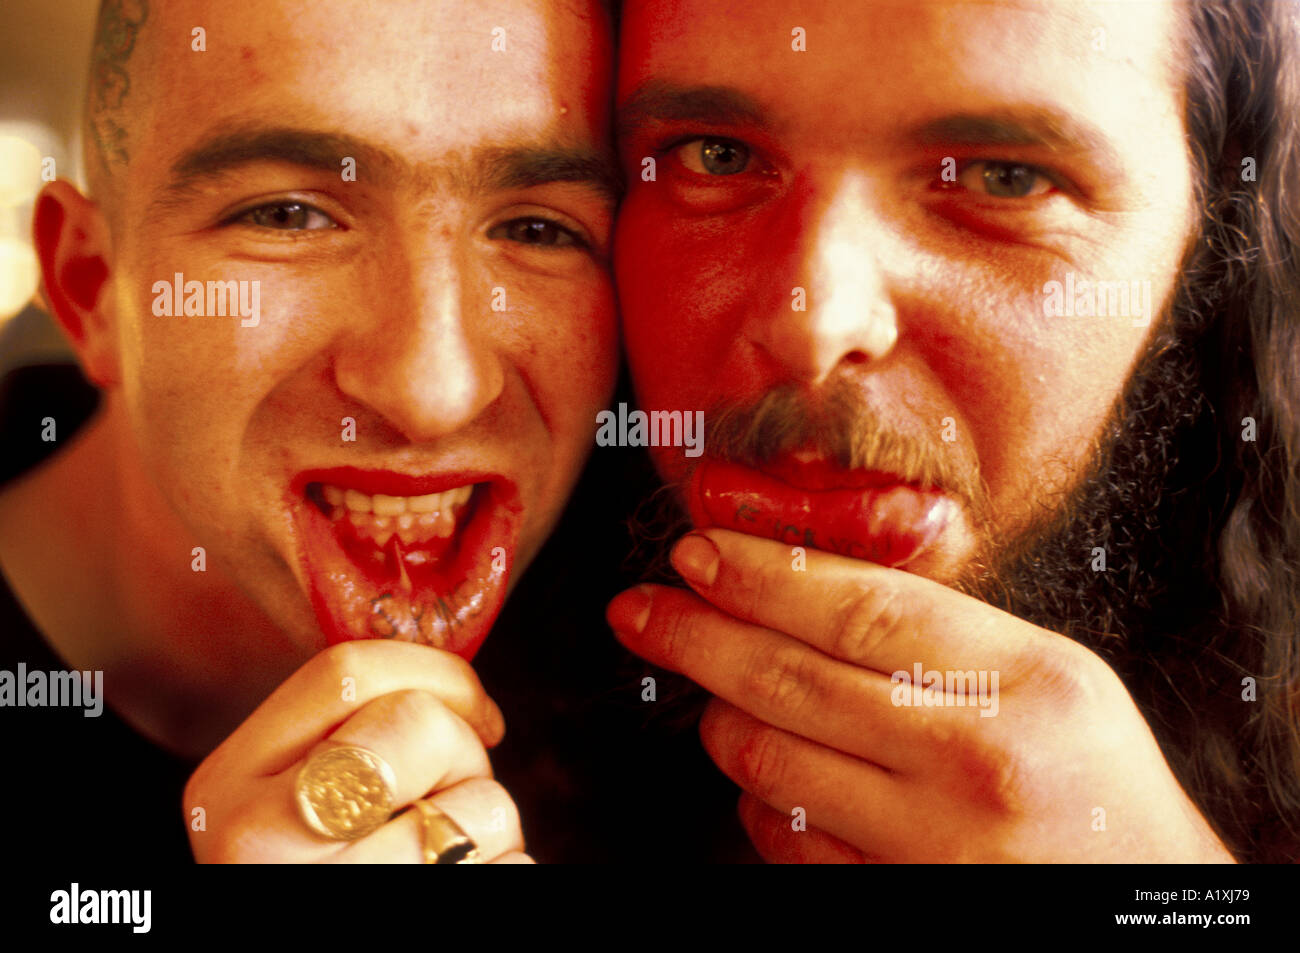 Men with tattoos on their inside lip Stock Photo  Alamy